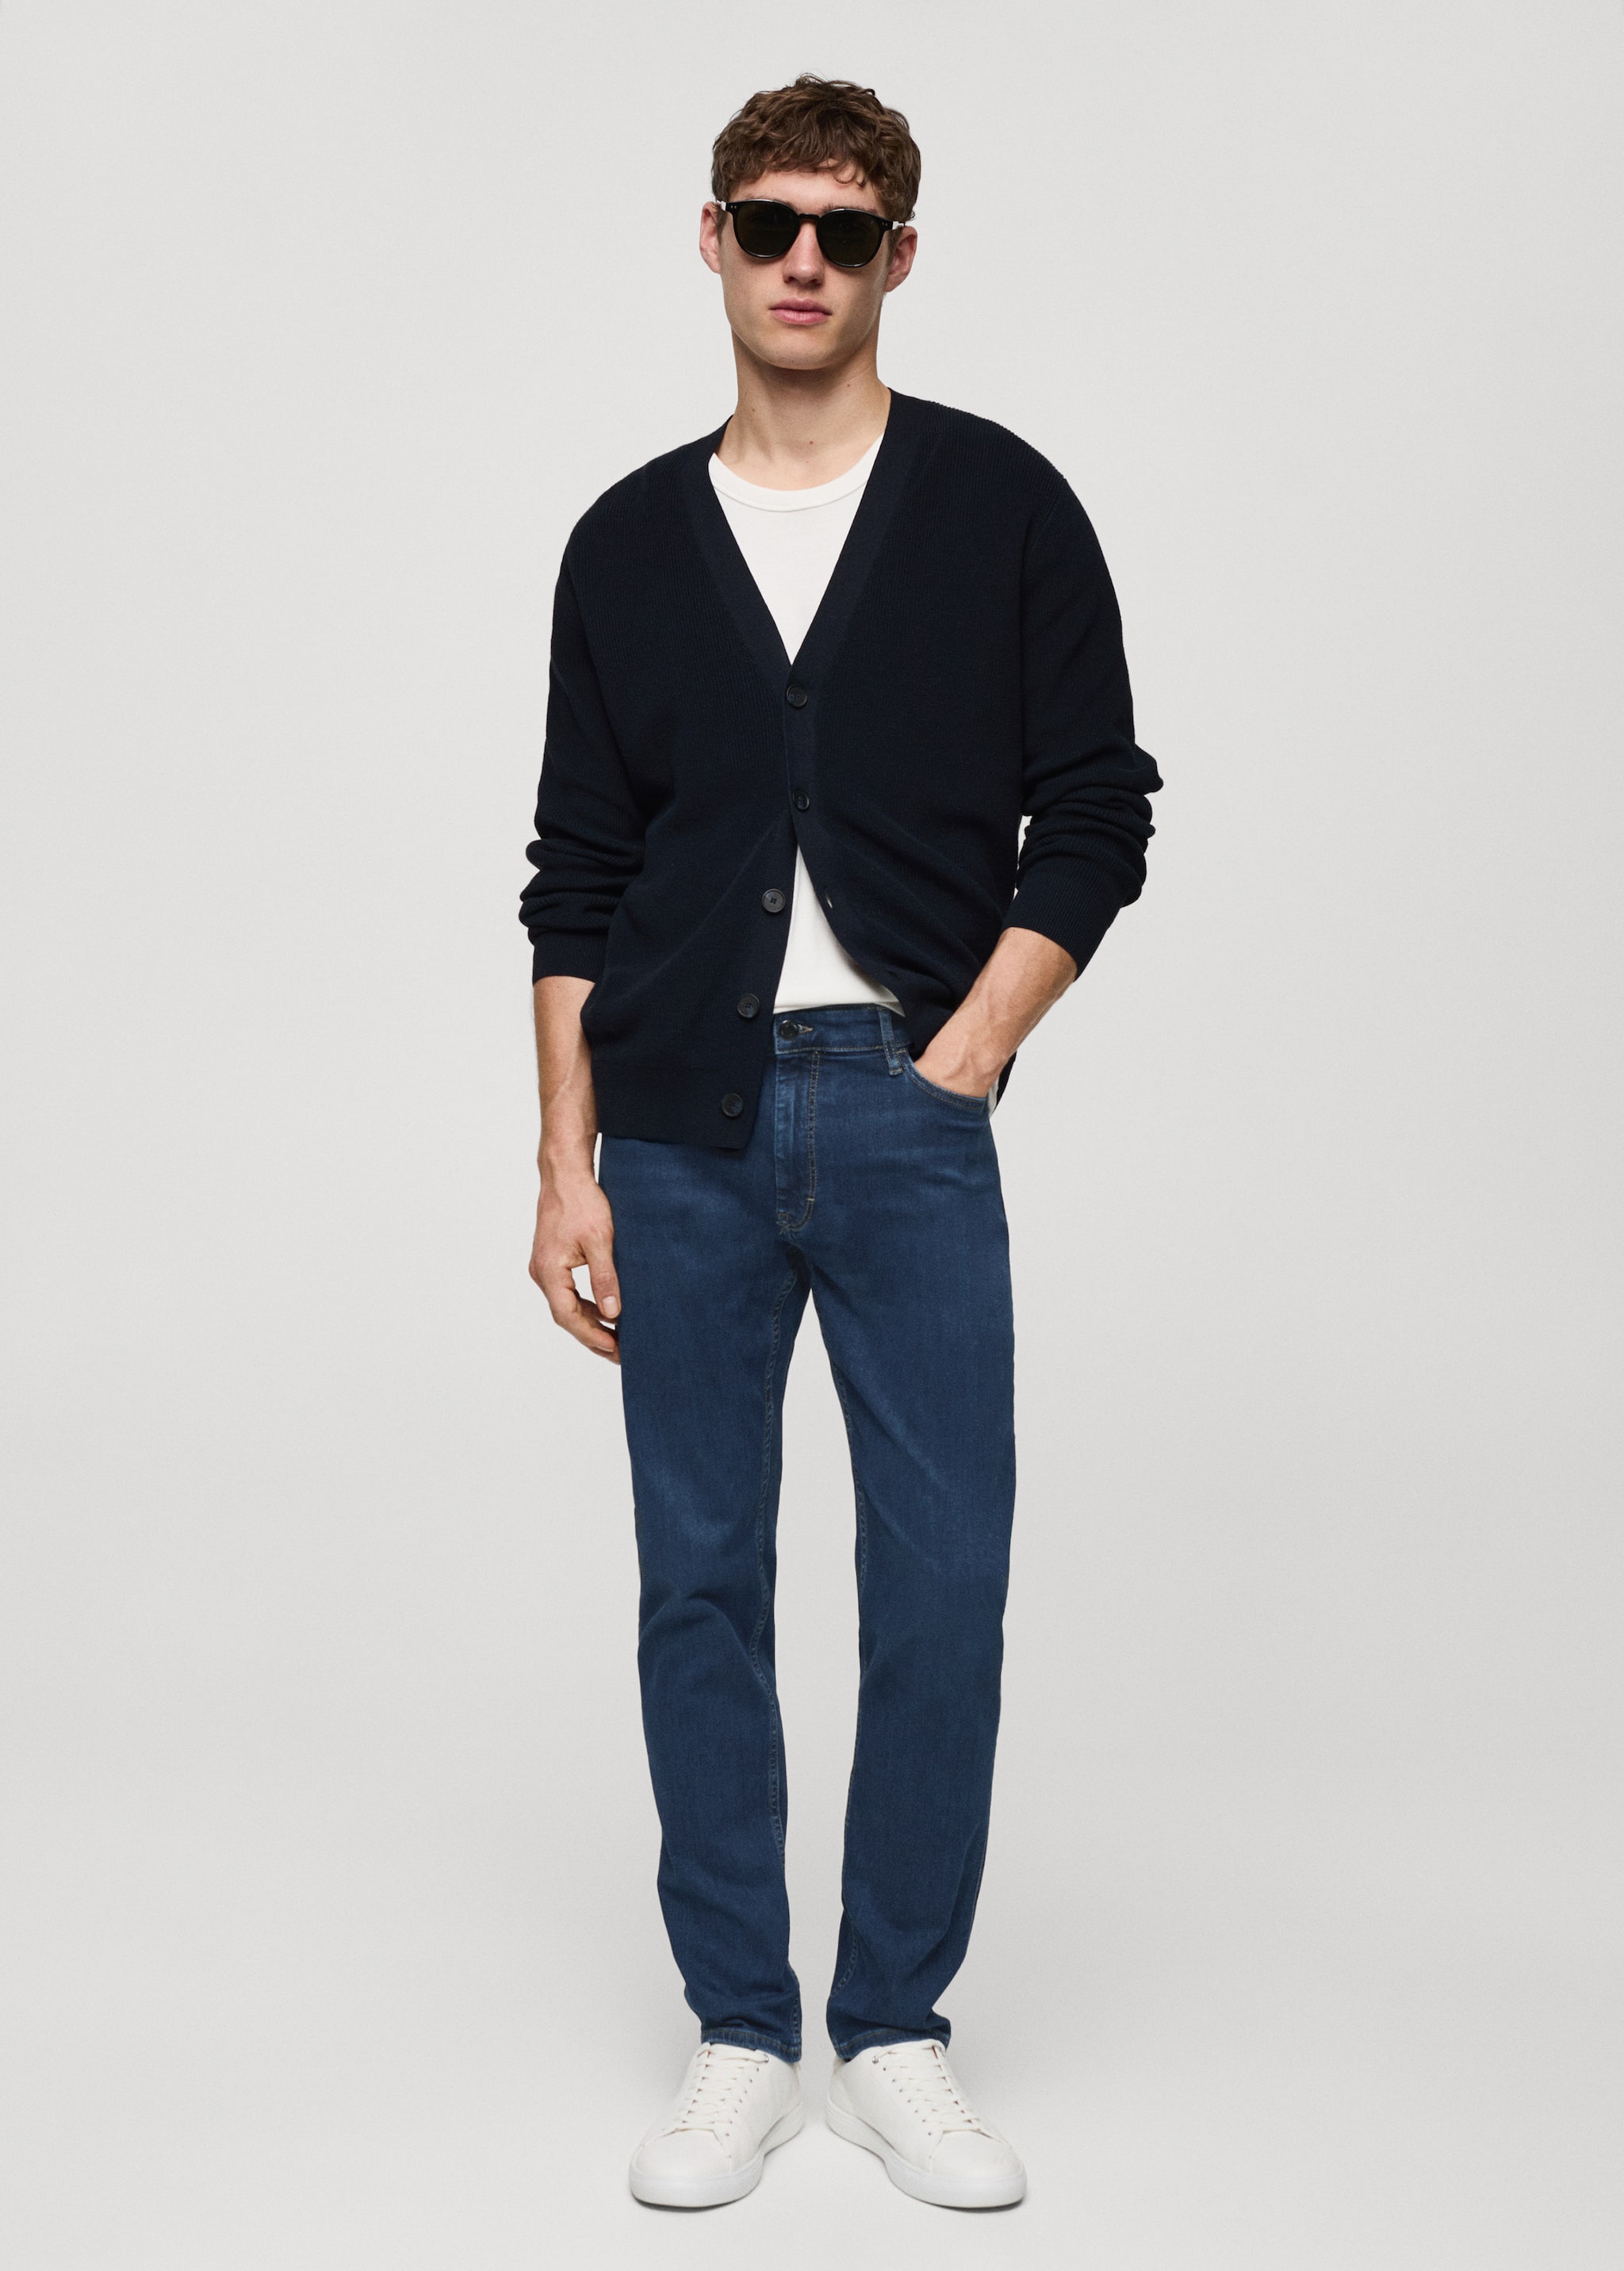 Jeans Patrick slim fit Ultra Soft Touch - Plano geral